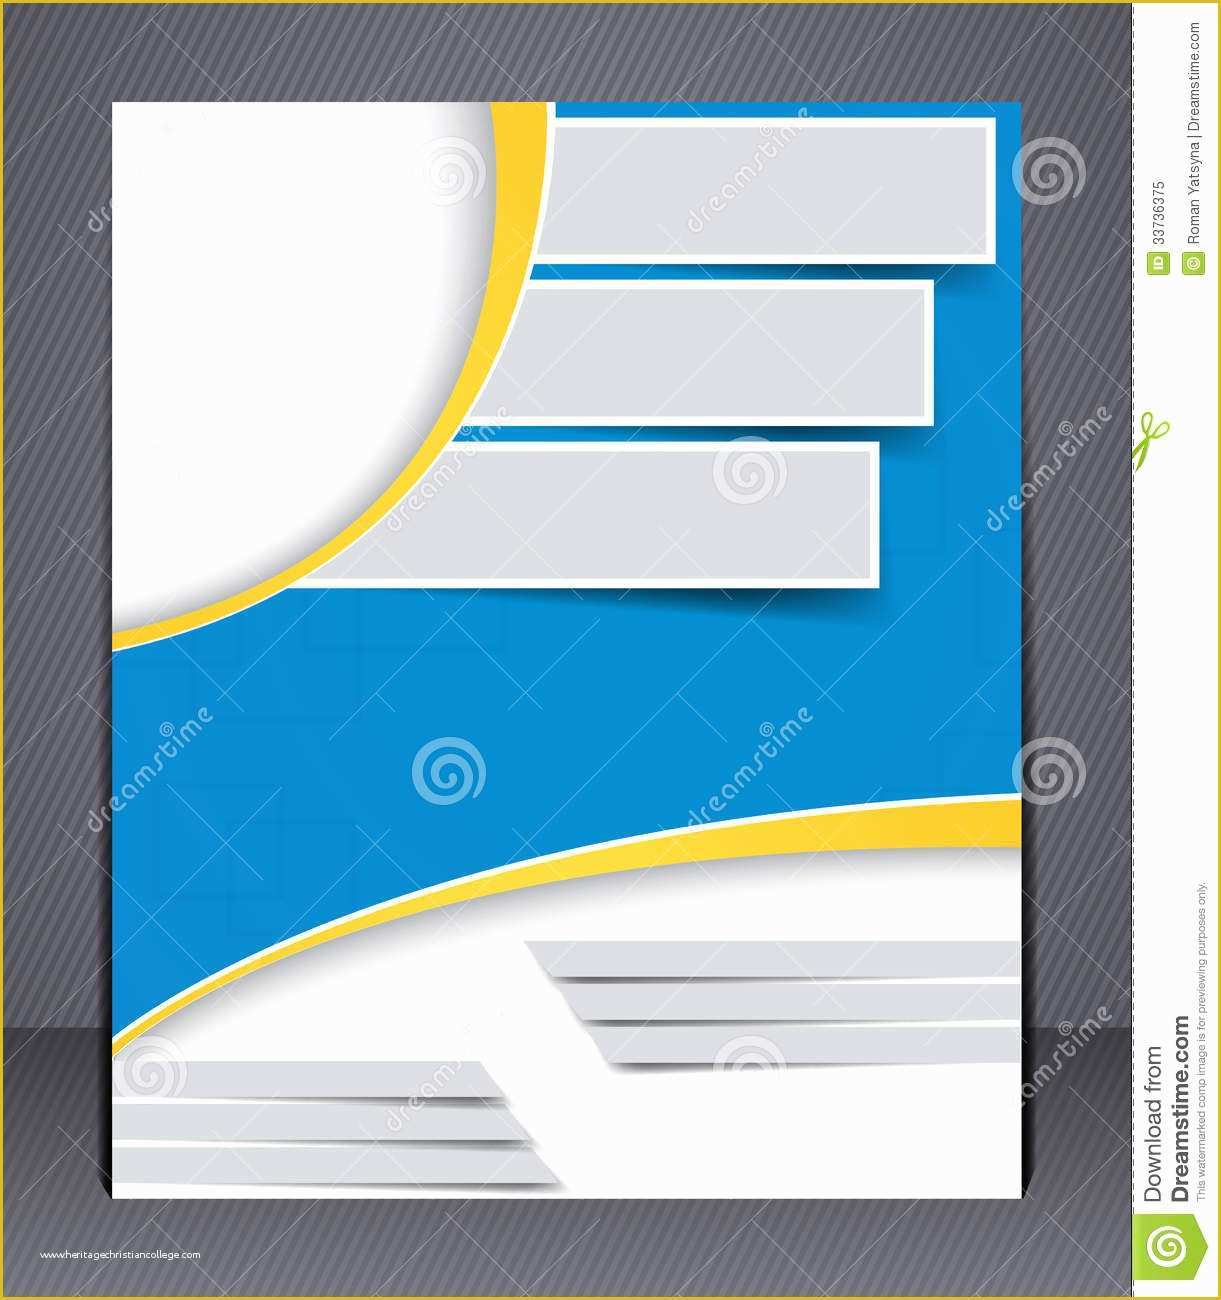 Free Online Mailer Design Templates Of Brochure Design In Blue and Yellow Colors Stock Vector